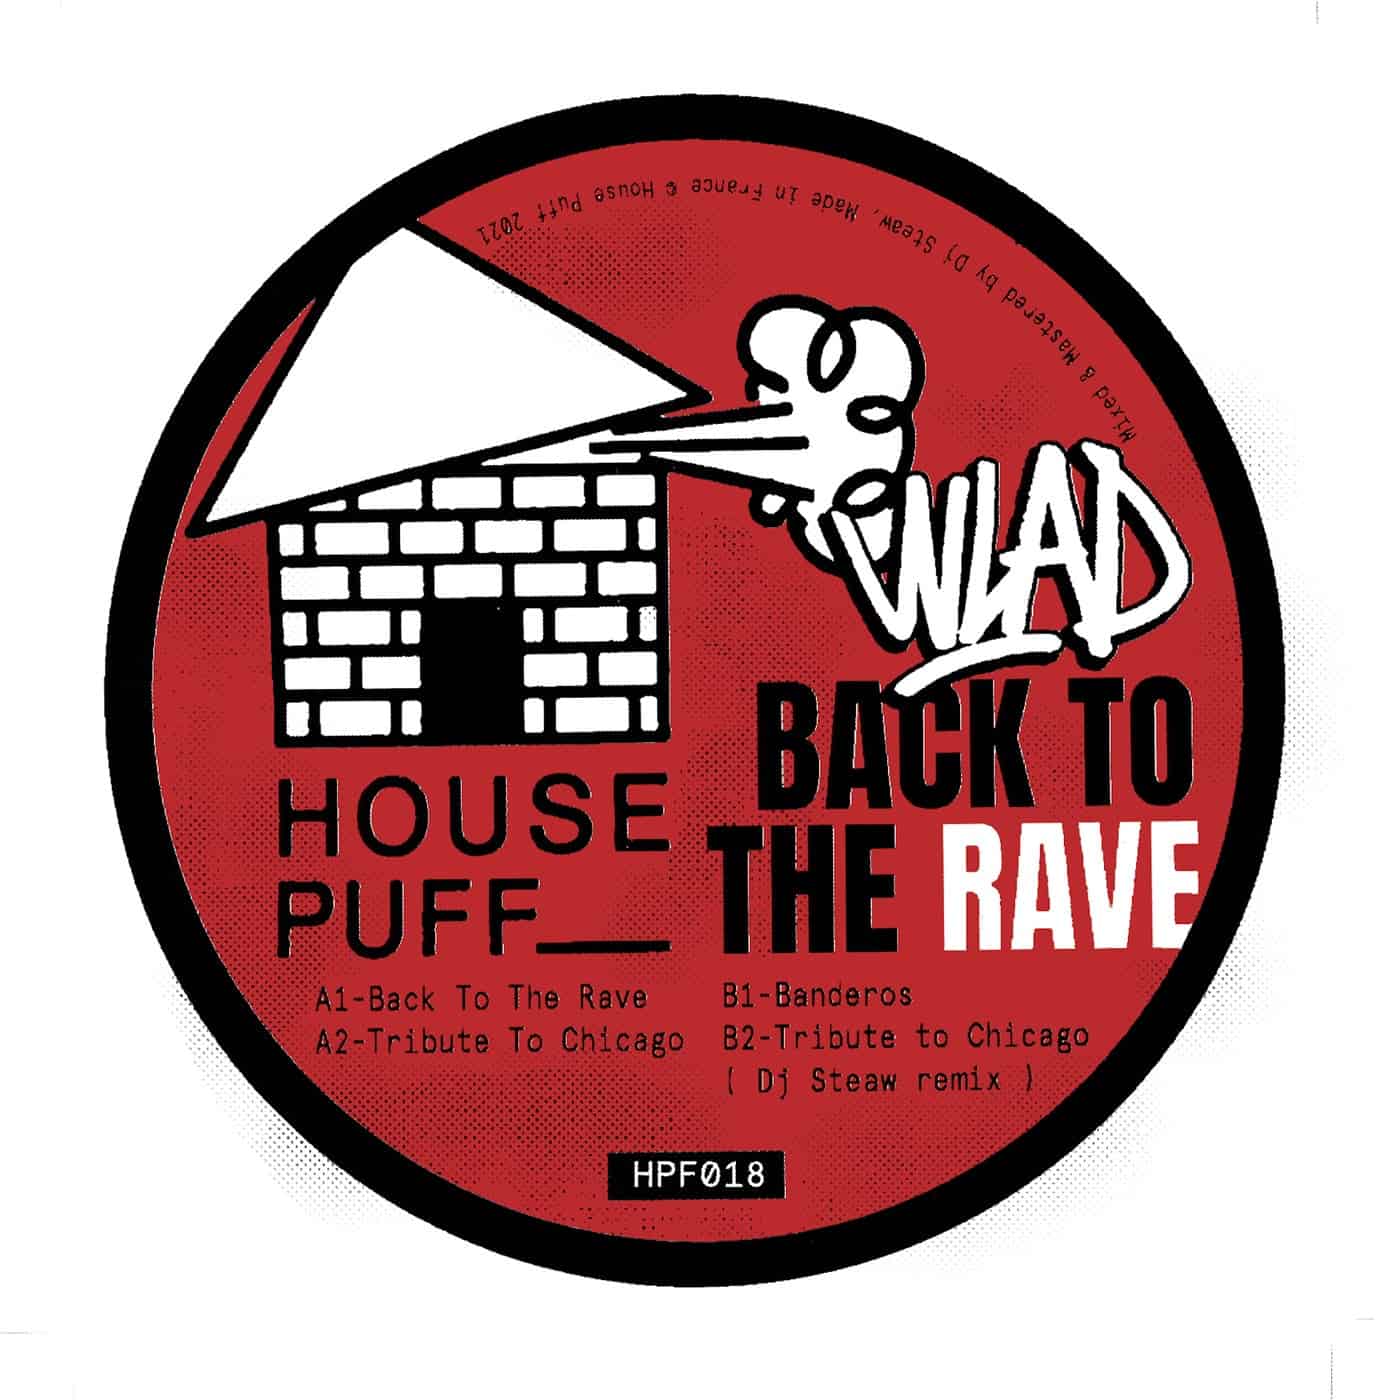 image cover: WLAD - Back To The Rave EP / HPF018